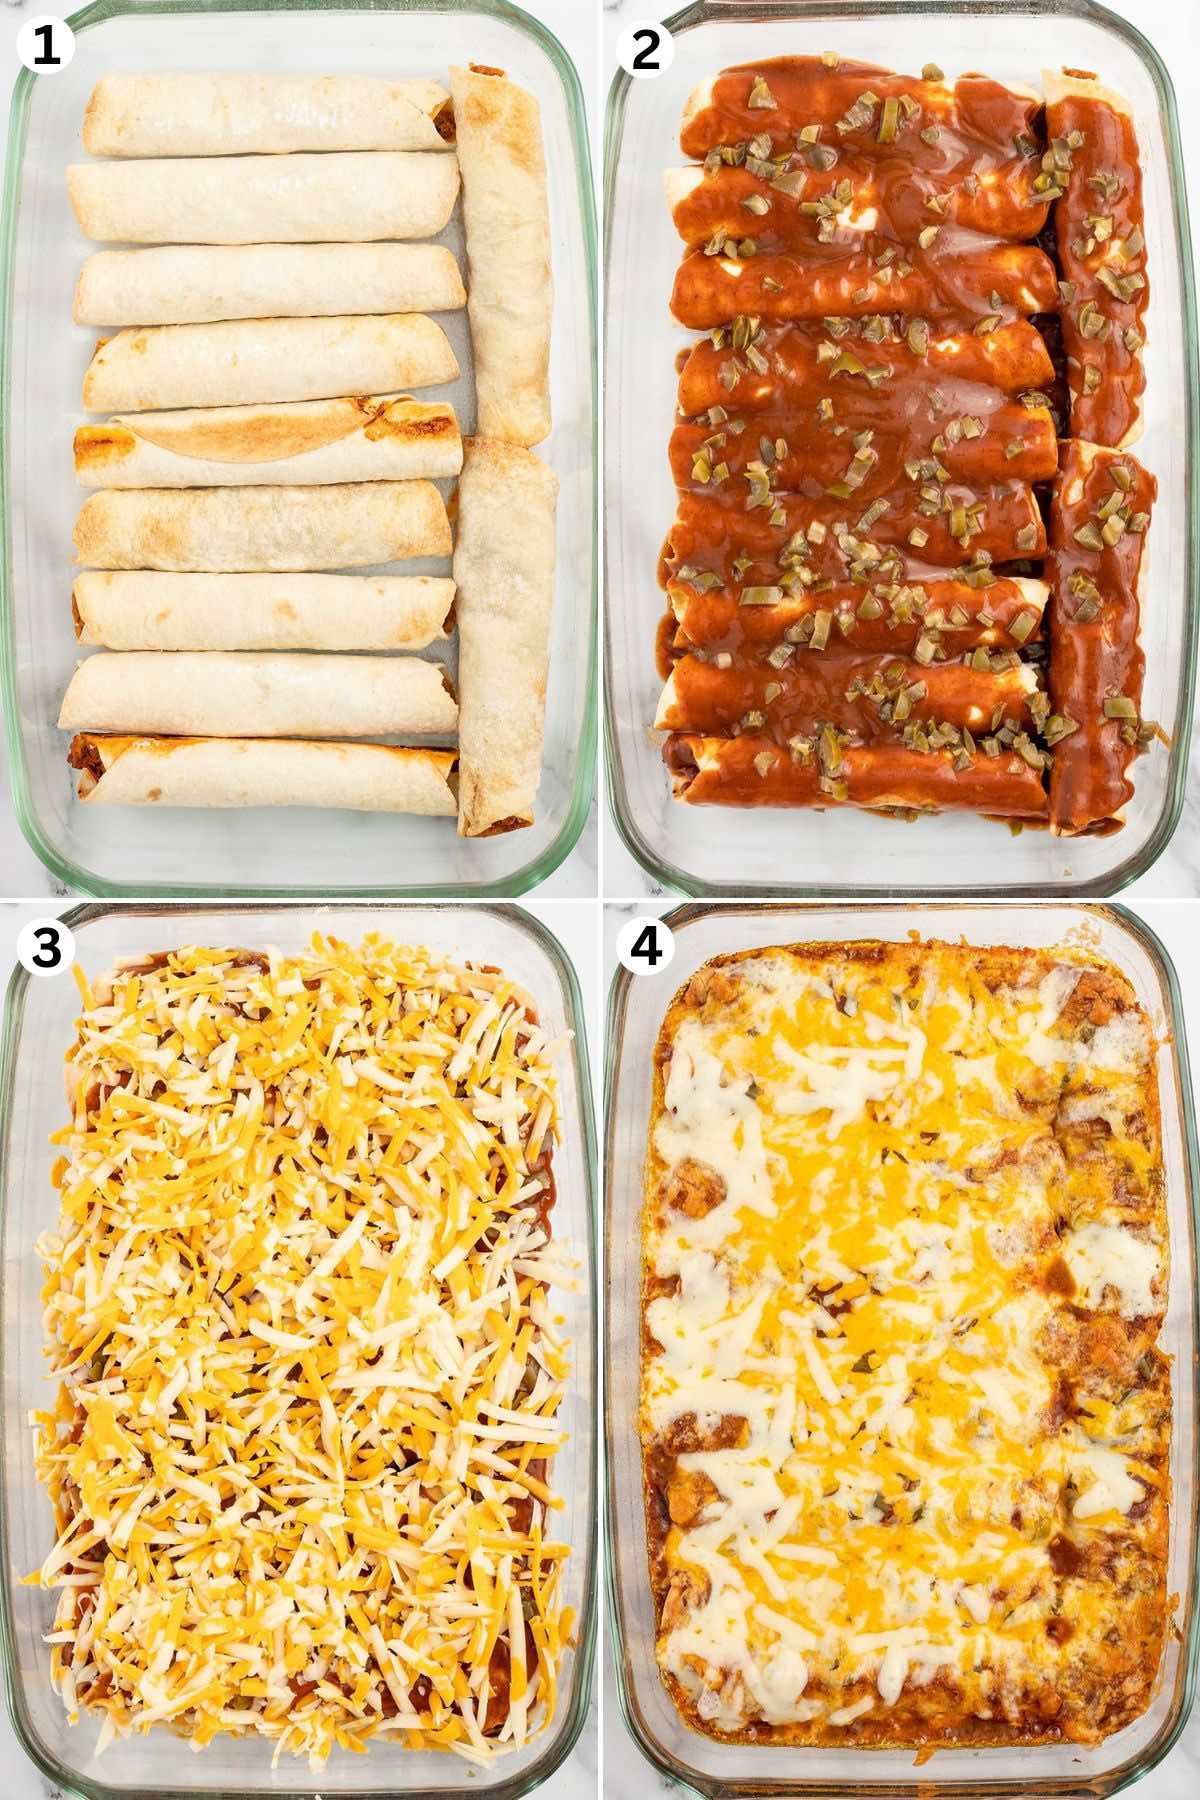 Place the taquitos into the baking dish. Pour the enchilada sauce over the taquitos. Top with shredded cheese and bake.